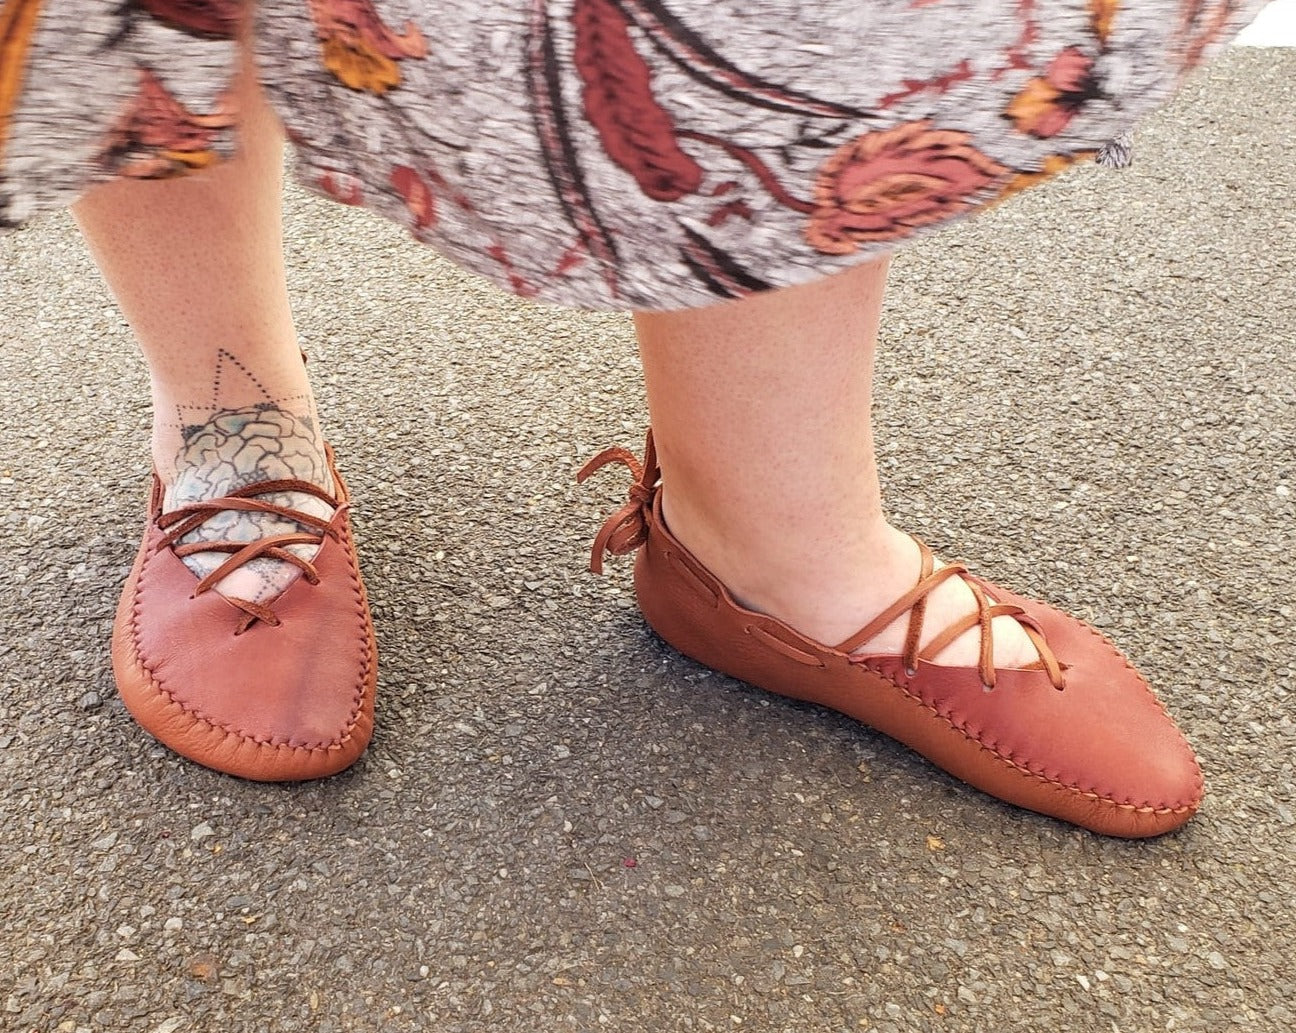 "Summer" Moccasins with Laces / Custom-Made Barefoot-Shoes Earthingmoccasins